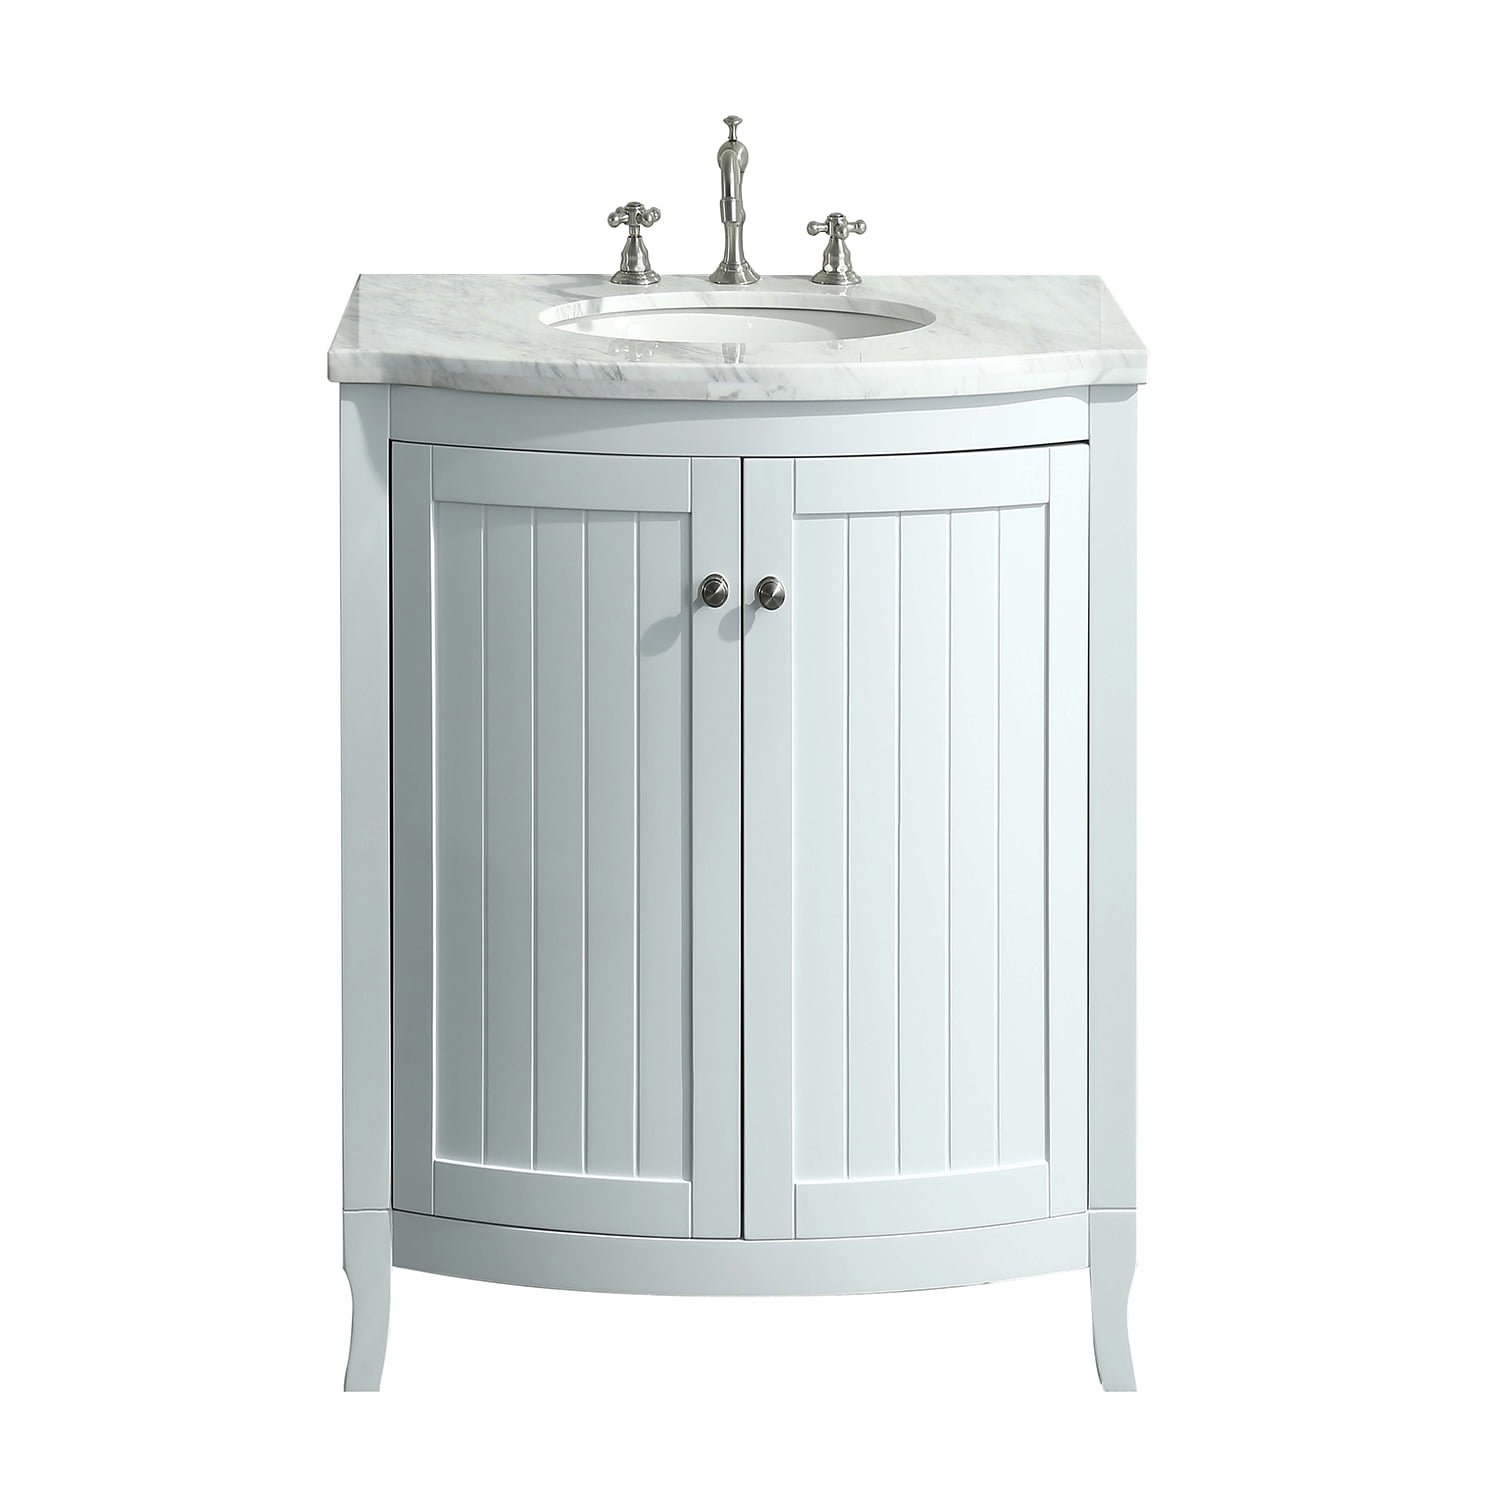 Eviva Odessa Zinx+ 24" White Bathroom Vanity with White Carrera Marble
Counter-top and Porcelain